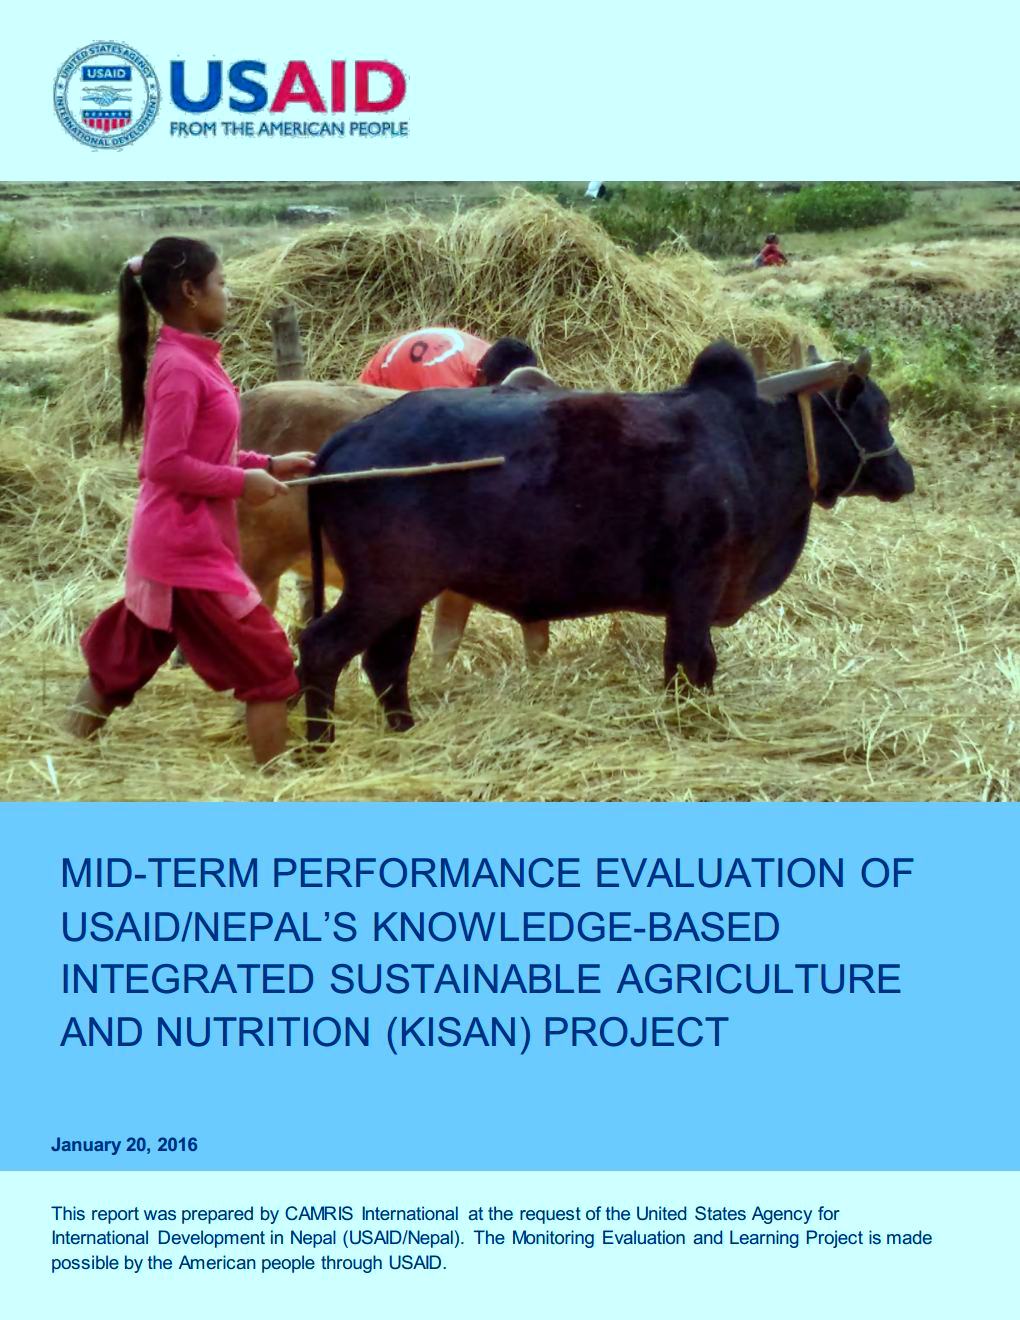 Mid-Term Performance Evaluation of Knowledge-Based Integrated Sustainable Agriculture and Nutrition (KISAN) Project